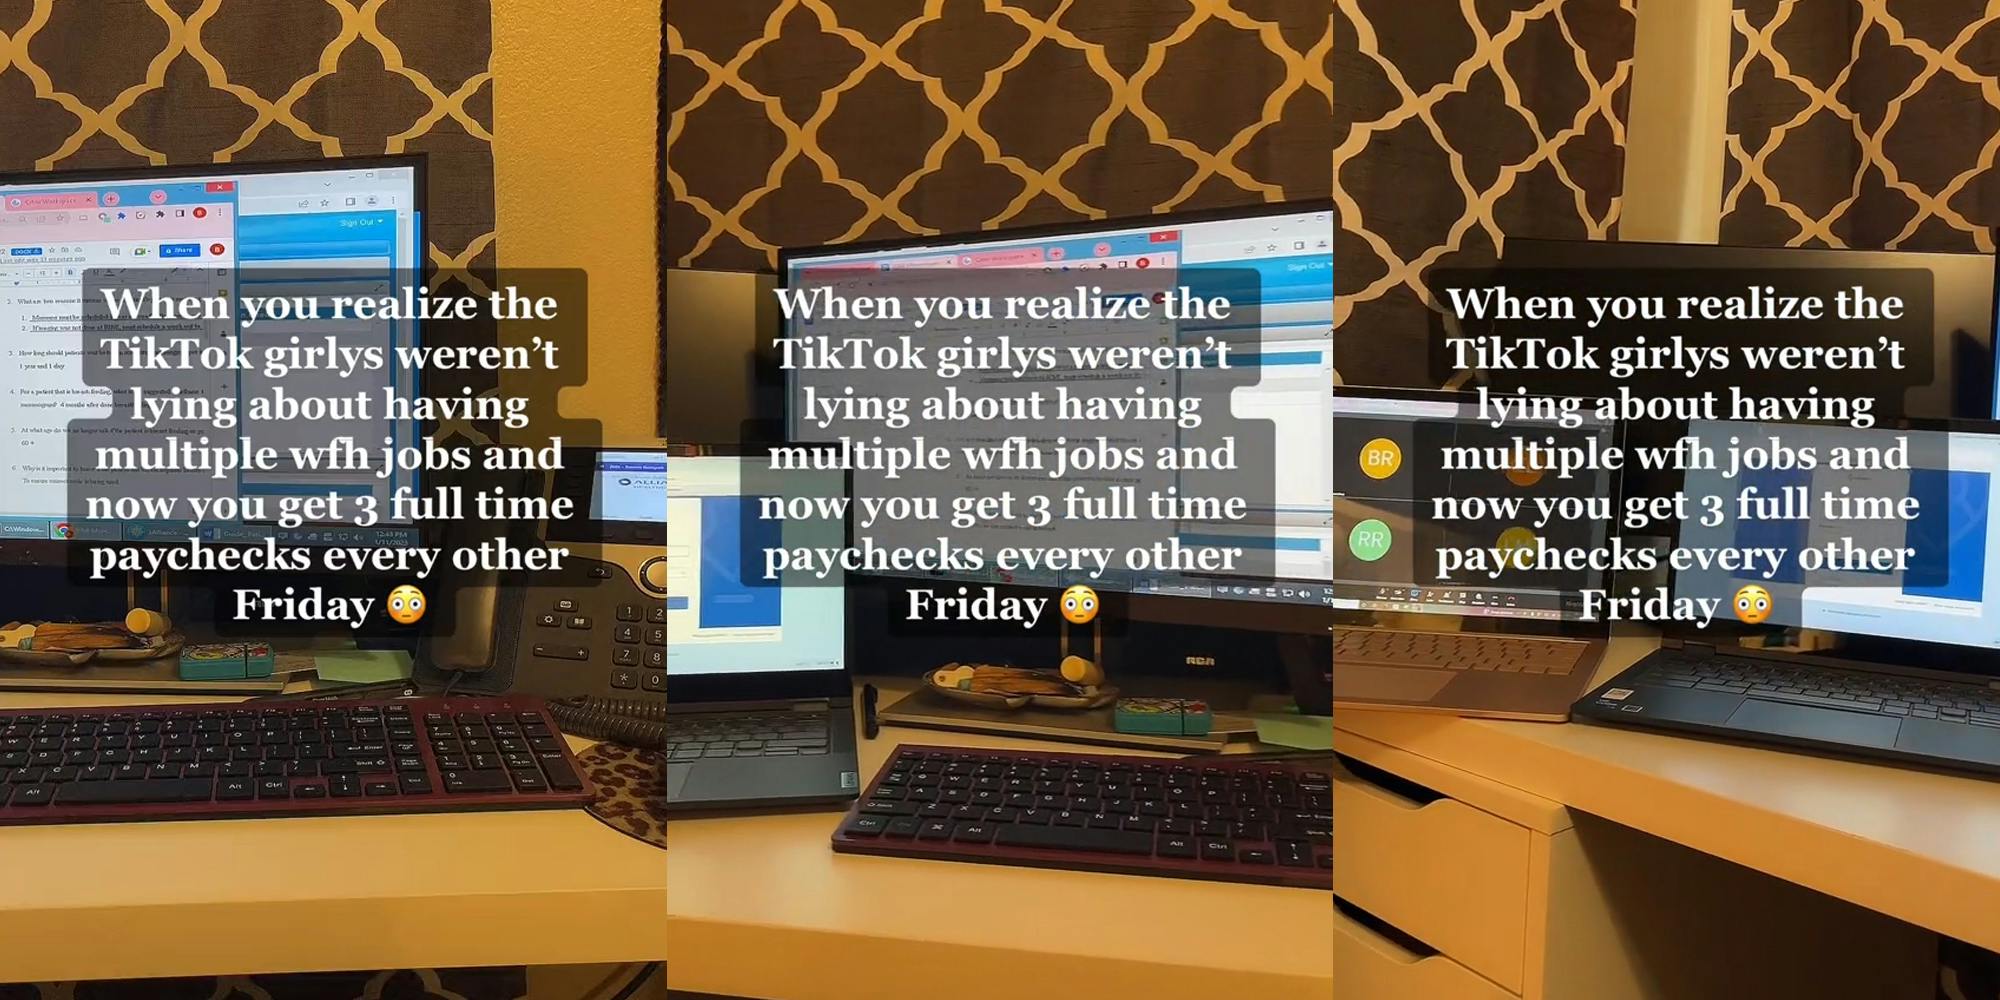 Desk with laptops and monitor with caption "When you realize the TikTok girlys weren't lying about having multiple wfh jobs and now you get 3 full time paychecks every other Friday" (l) Desk with laptops and monitor with caption "When you realize the TikTok girlys weren't lying about having multiple wfh jobs and now you get 3 full time paychecks every other Friday" (c) Desk with laptops and monitor with caption "When you realize the TikTok girlys weren't lying about having multiple wfh jobs and now you get 3 full time paychecks every other Friday" (r)